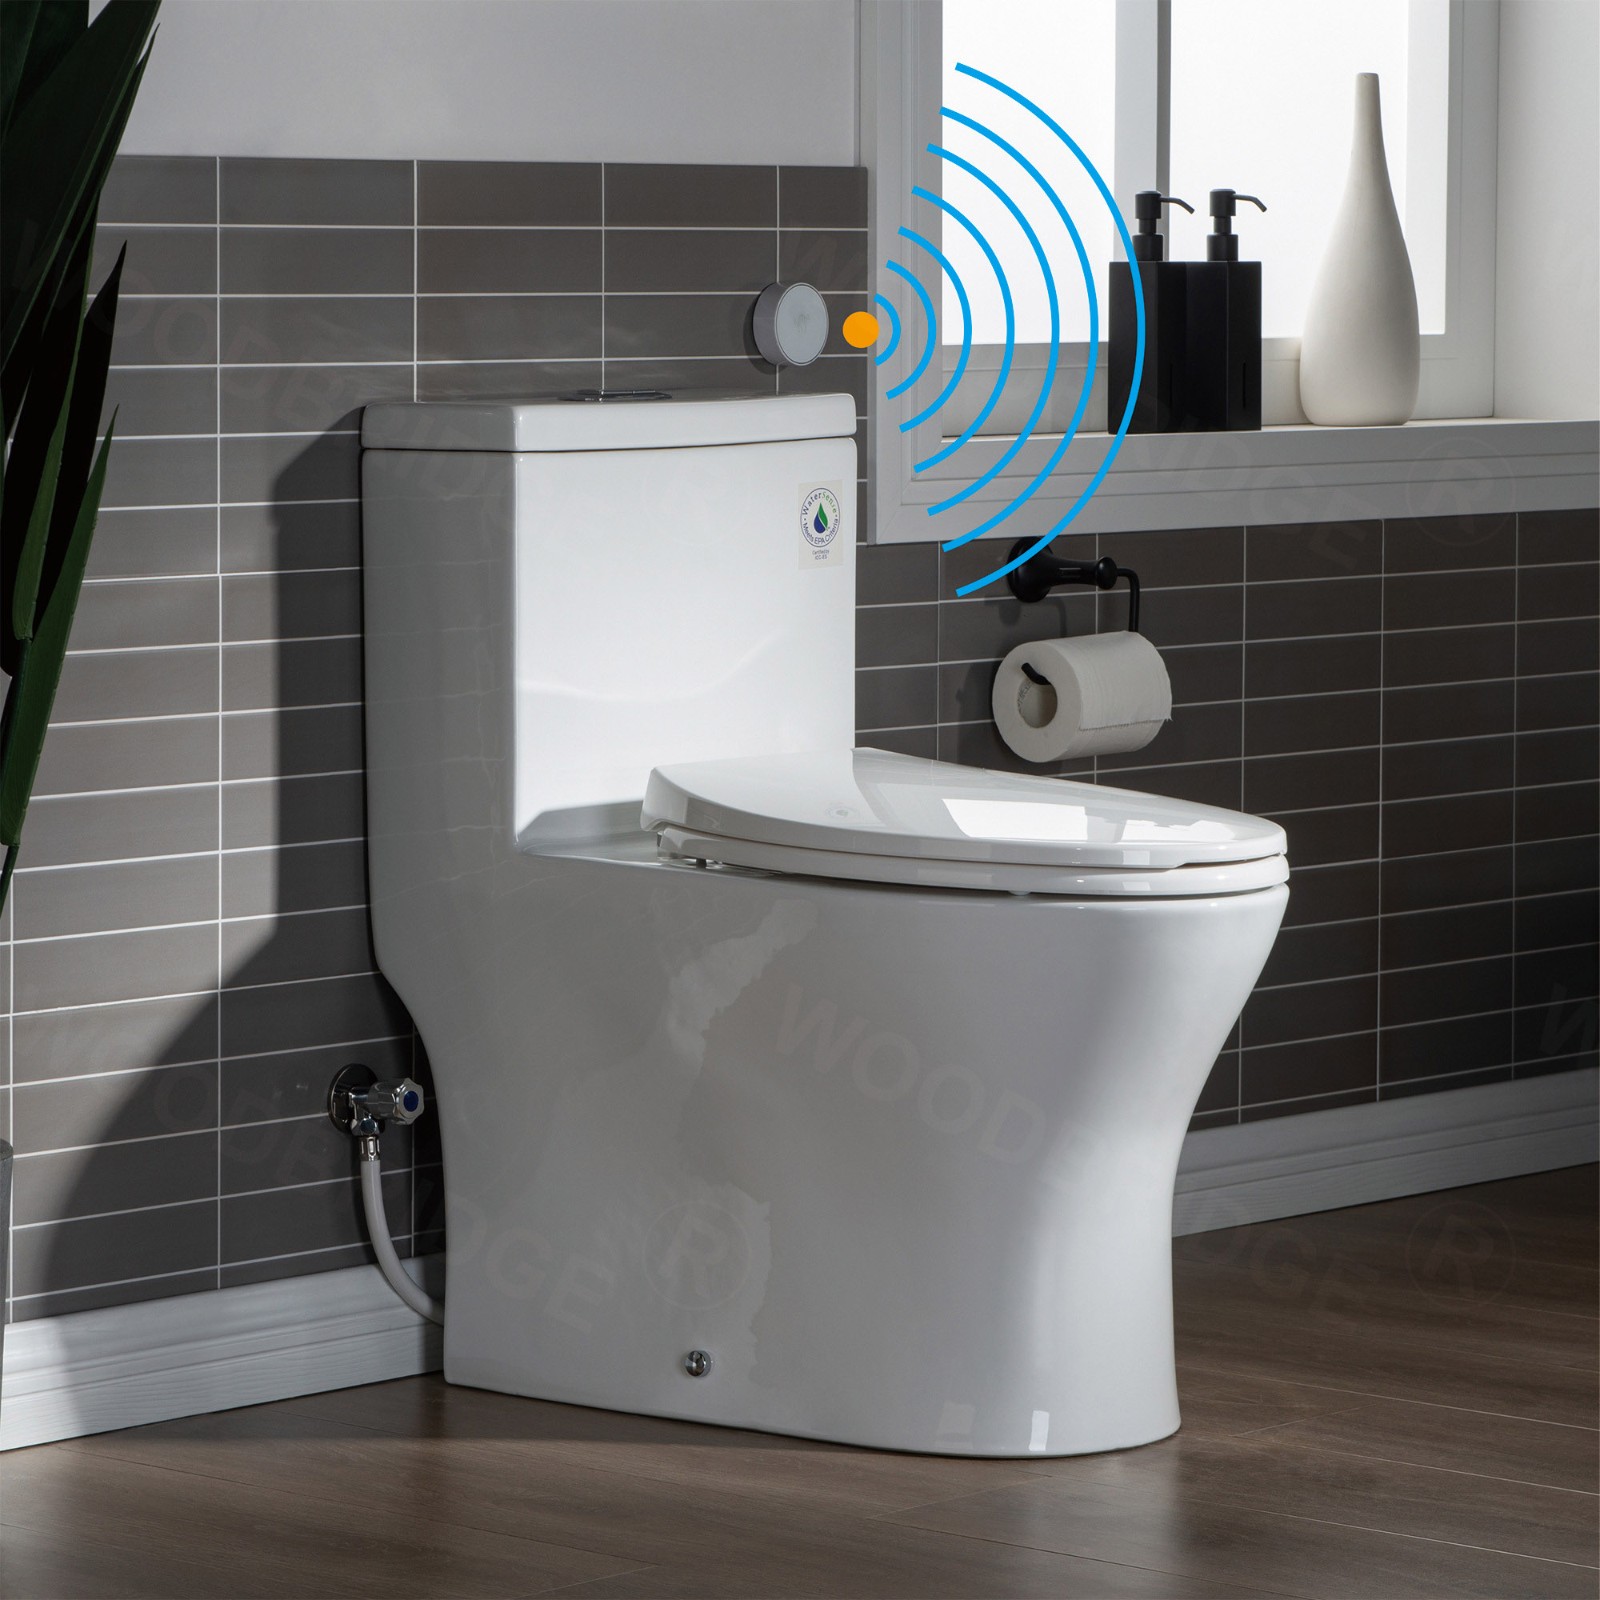  WOODBRIDGE B-0750-A Modern One-Piece Elongated toilet with Solf Closed Seat and Hand Free Touchless Sensor Flush Kit, White_5465